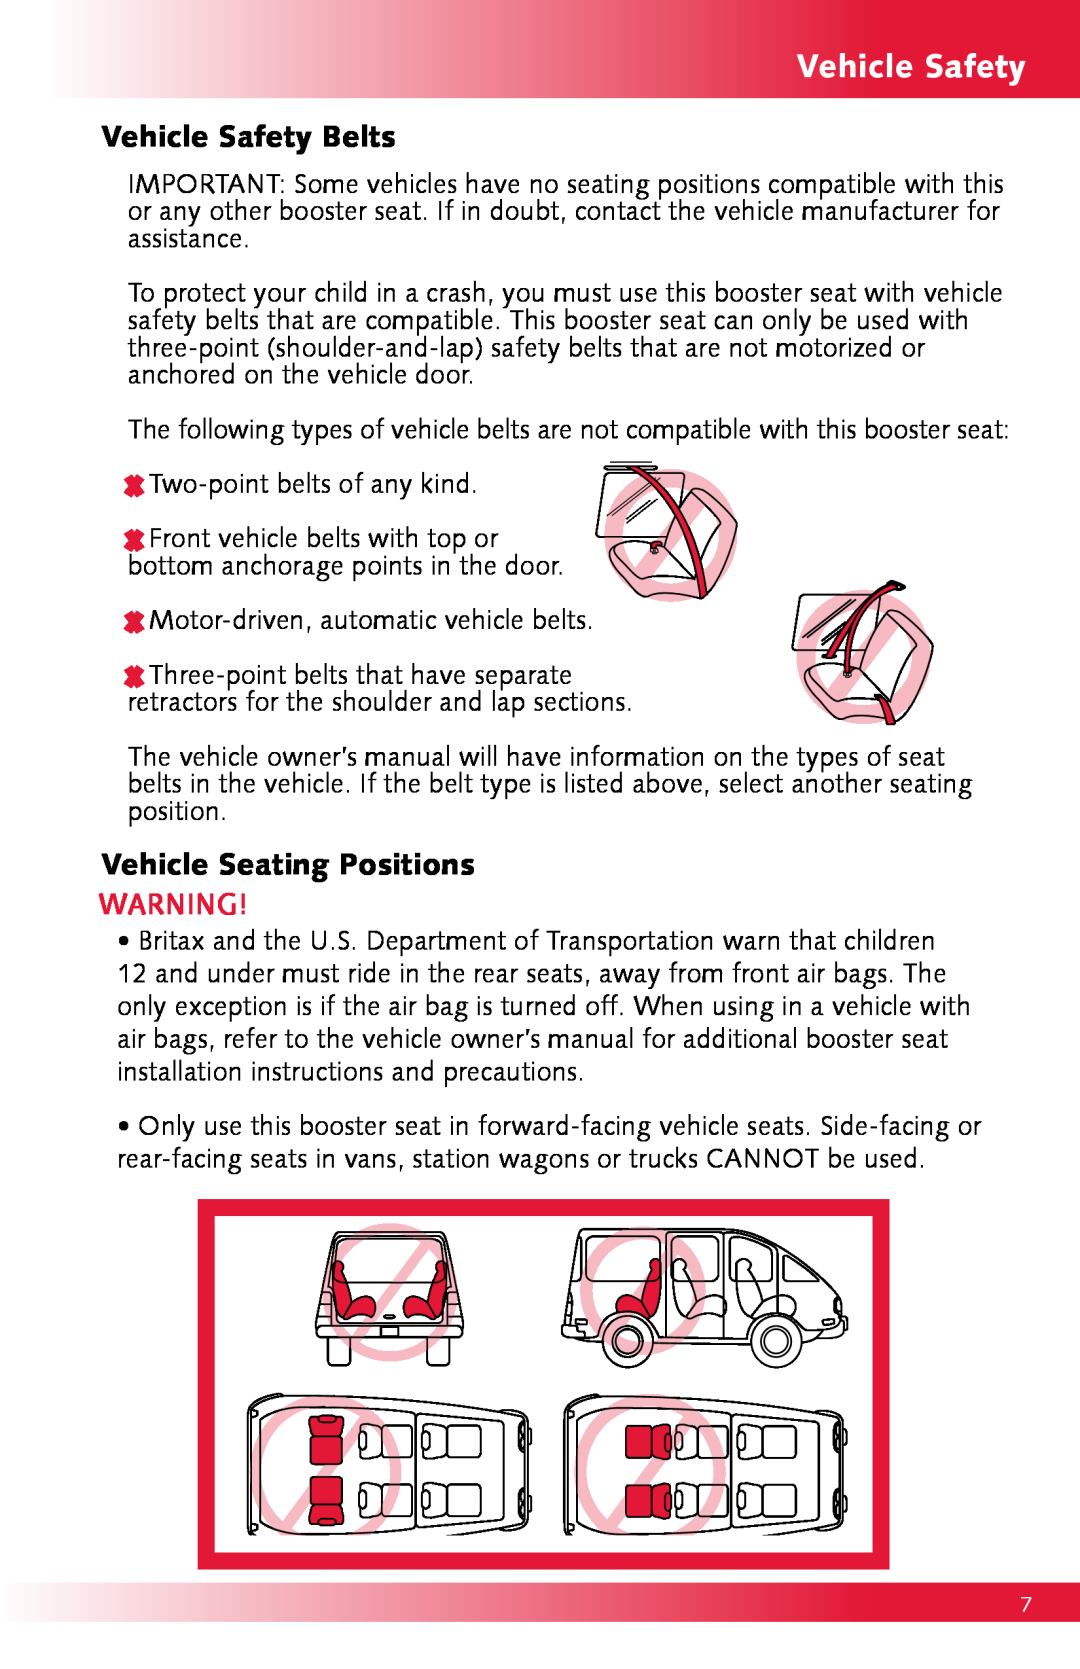 Britax Monarch manual Vehicle Safety Belts, Vehicle Seating Positions 